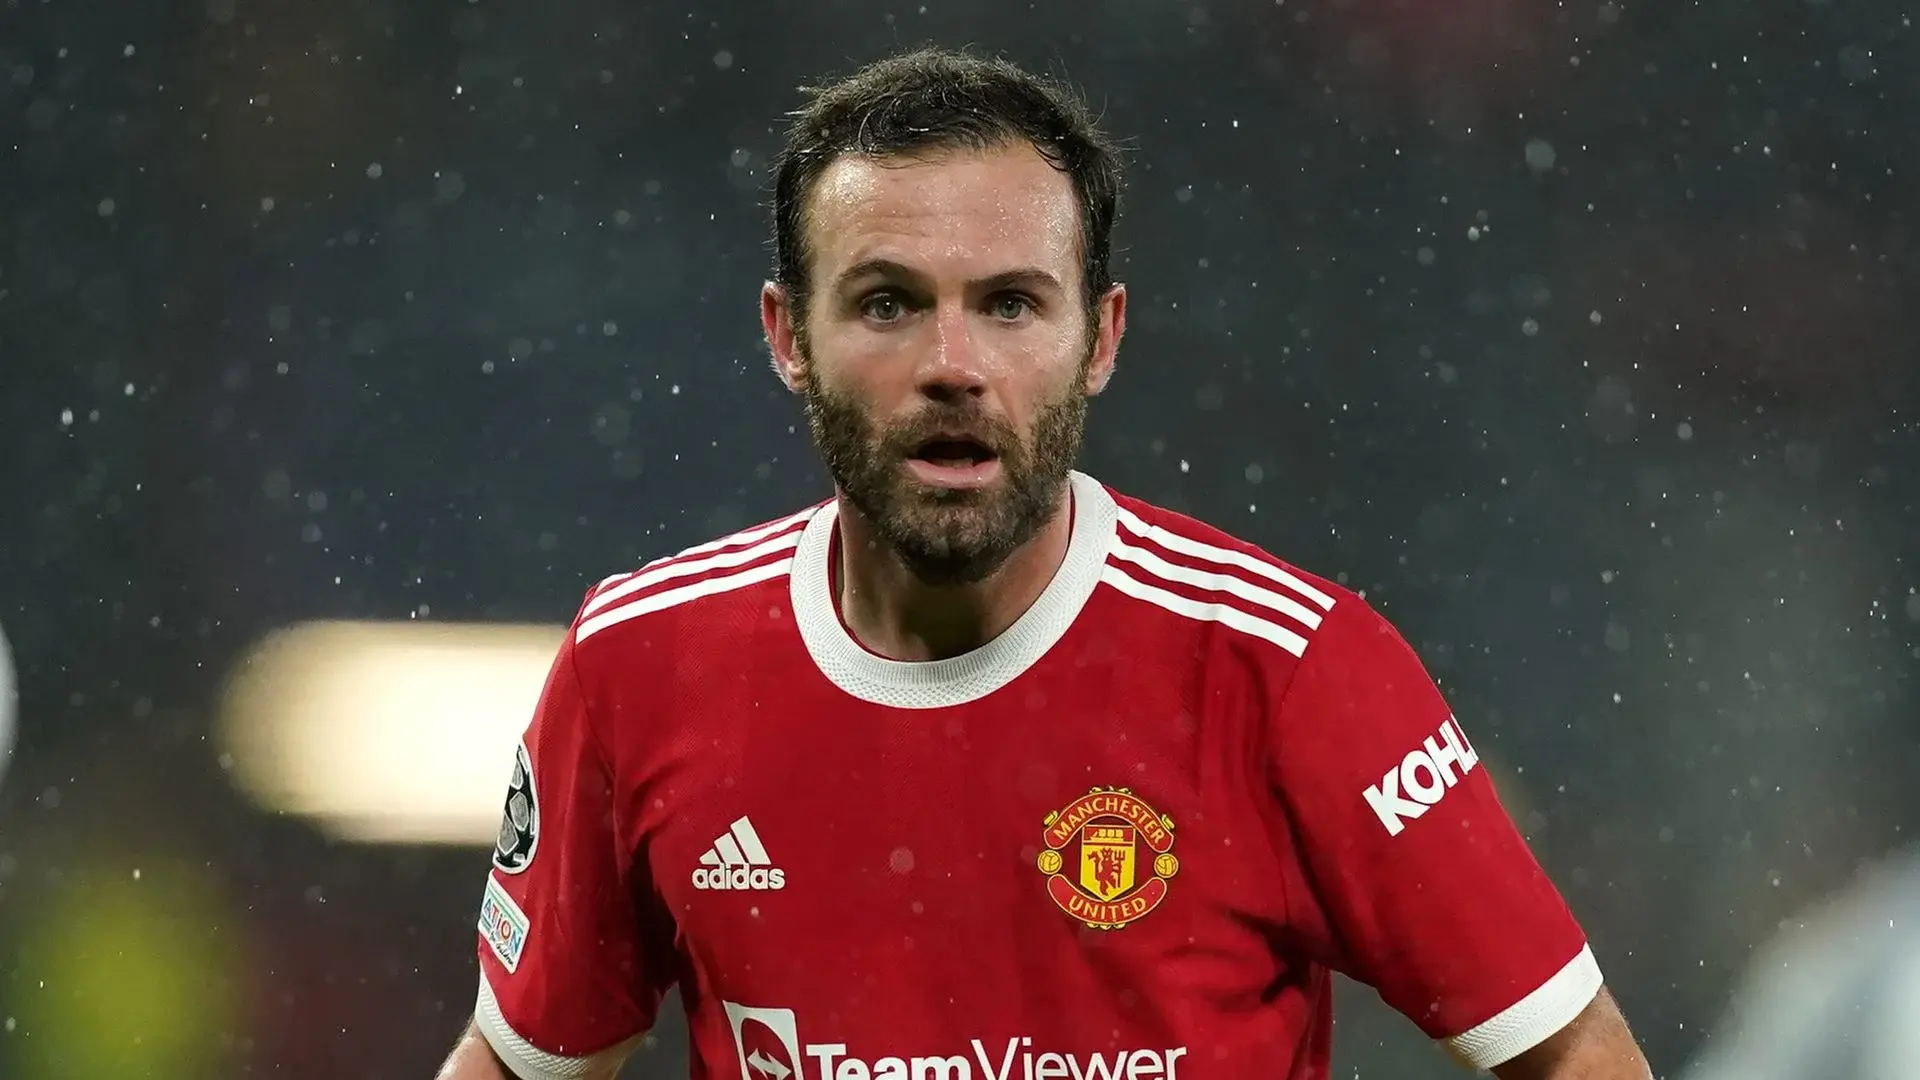 Clear way for Elche CF with the signing of Juan Mata
